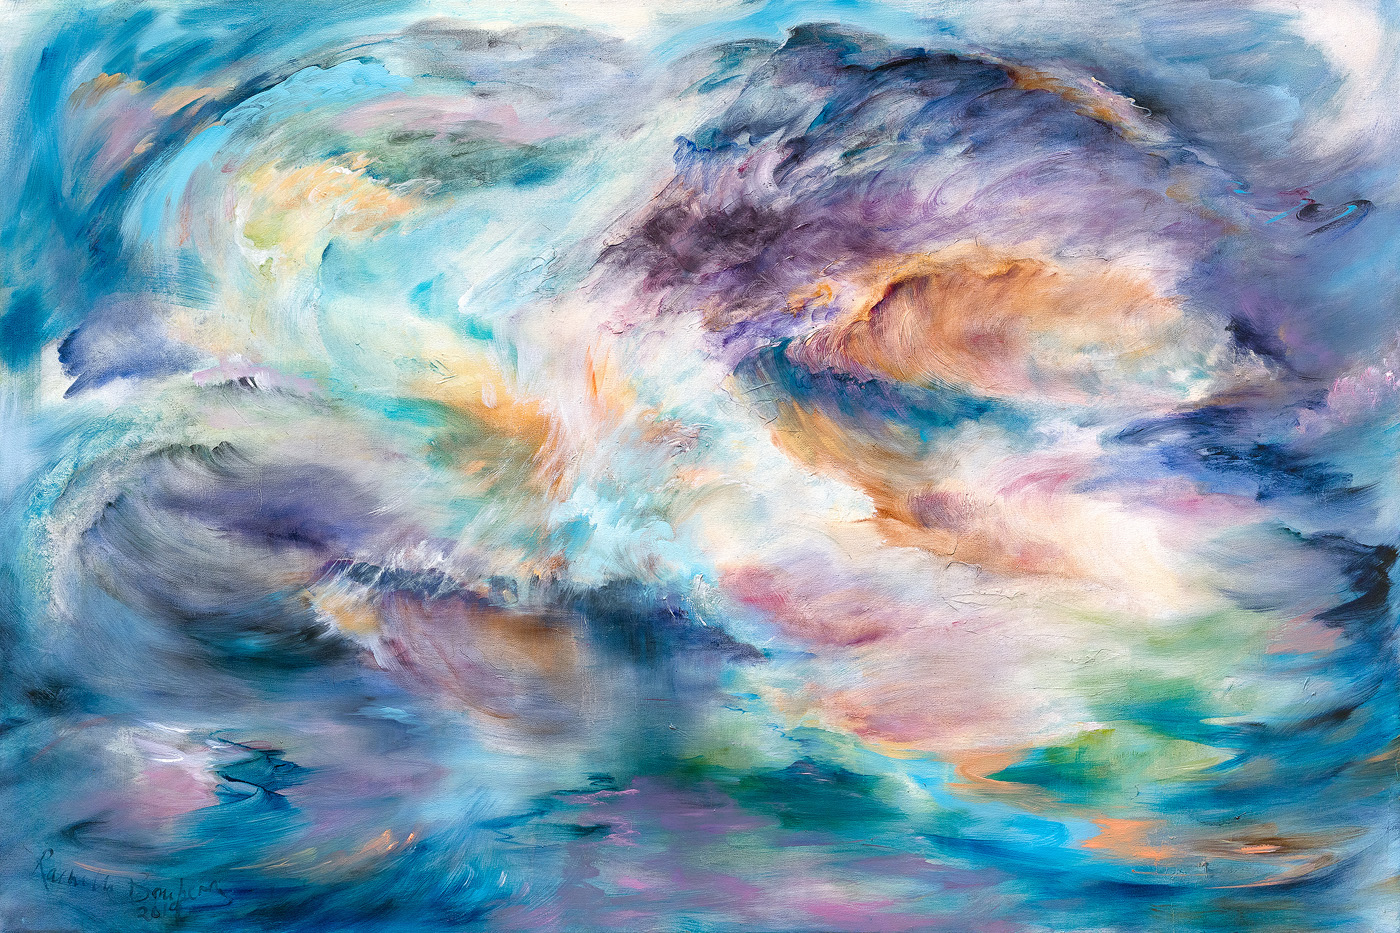 2019 - I must go down to the seas again - 1.8 x 1.2m